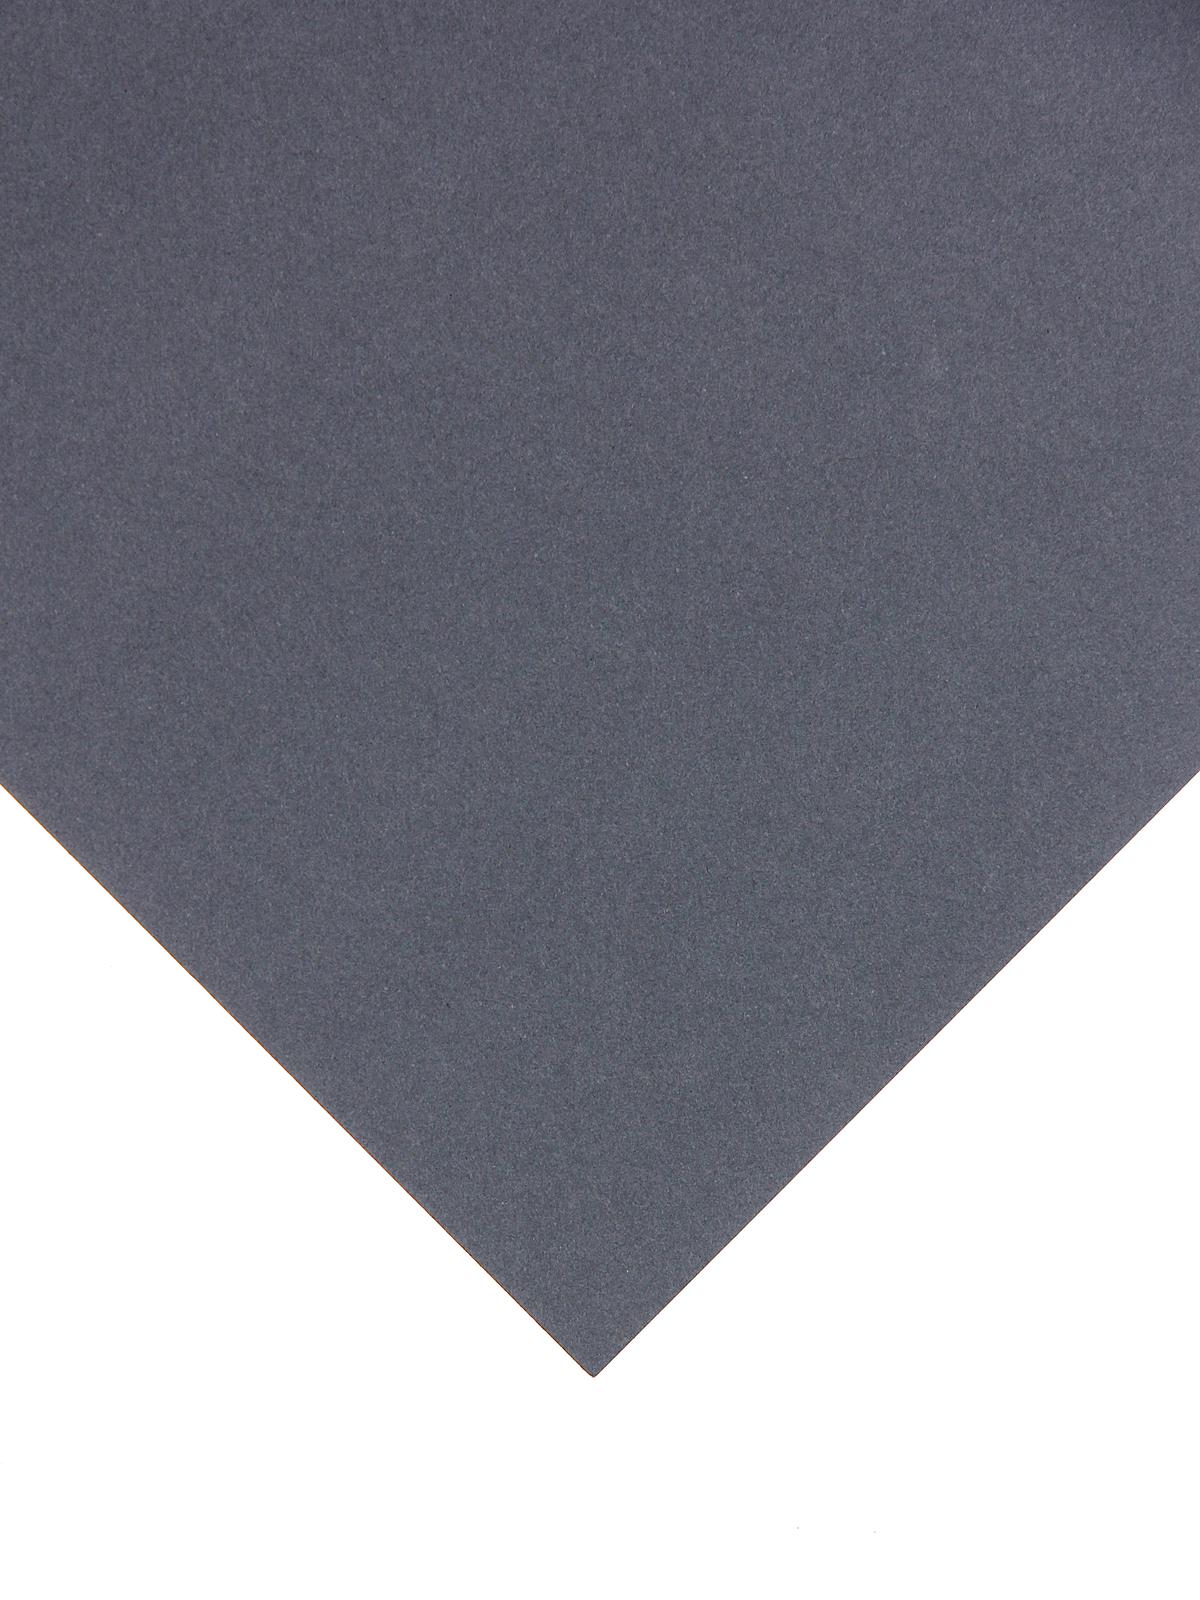 Mi-Teintes Tinted Paper Charcoal Grey 8.5 In. X 11 In.